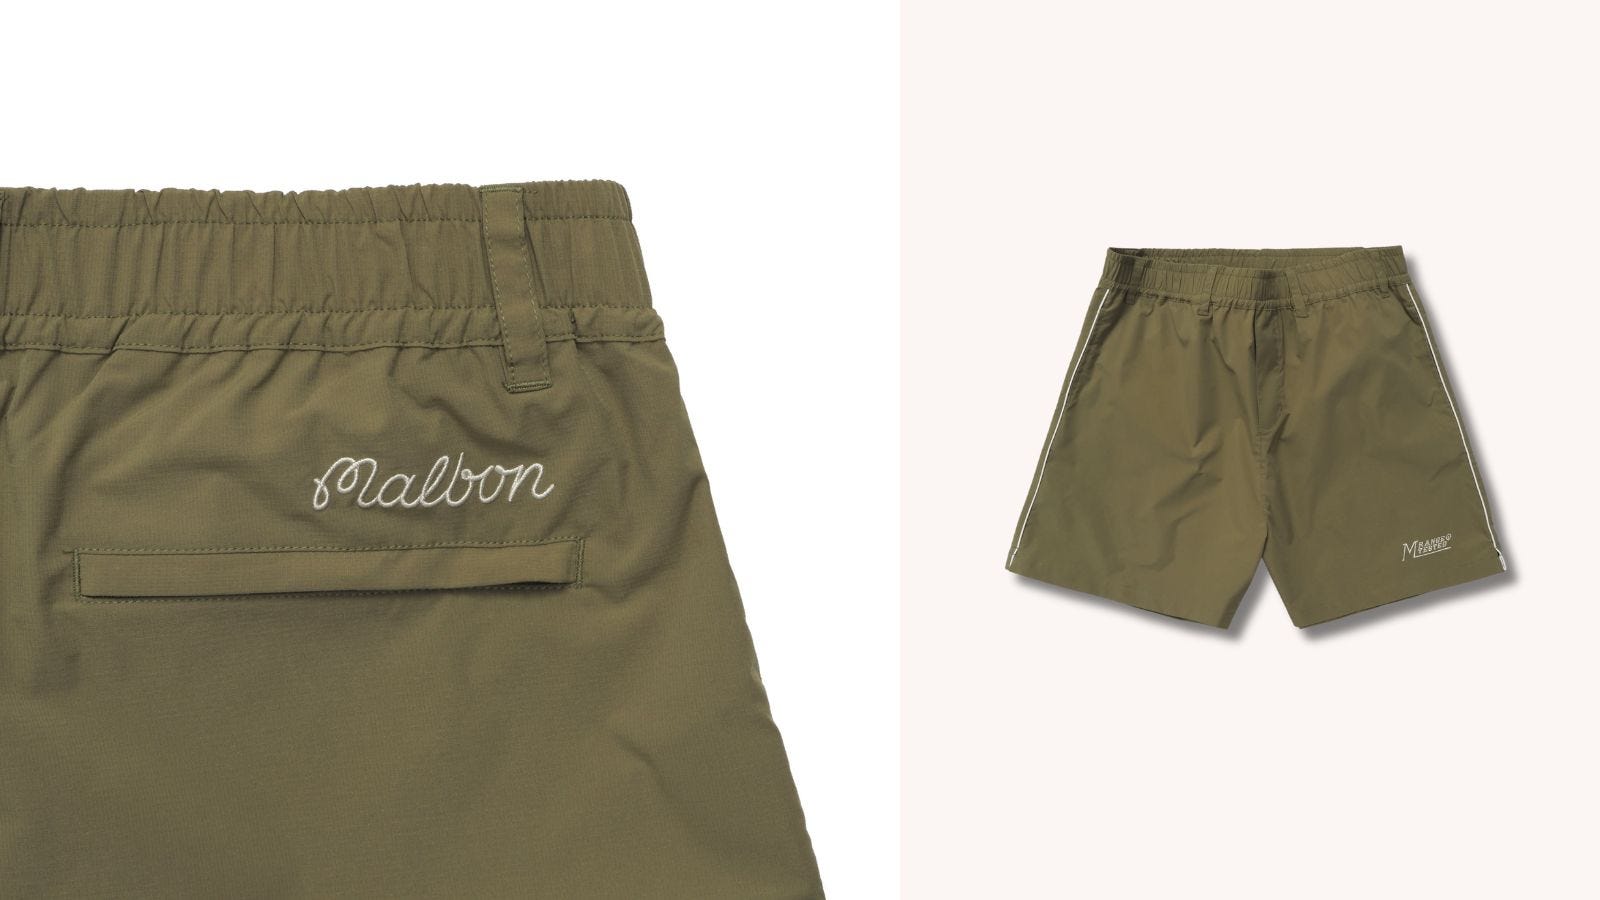 two images side by side: on the left, a close-up of the back of a pair of olive-colored performance shorts with "malbon" embroidered by the waist, and on the right, a view of the shorts from the front